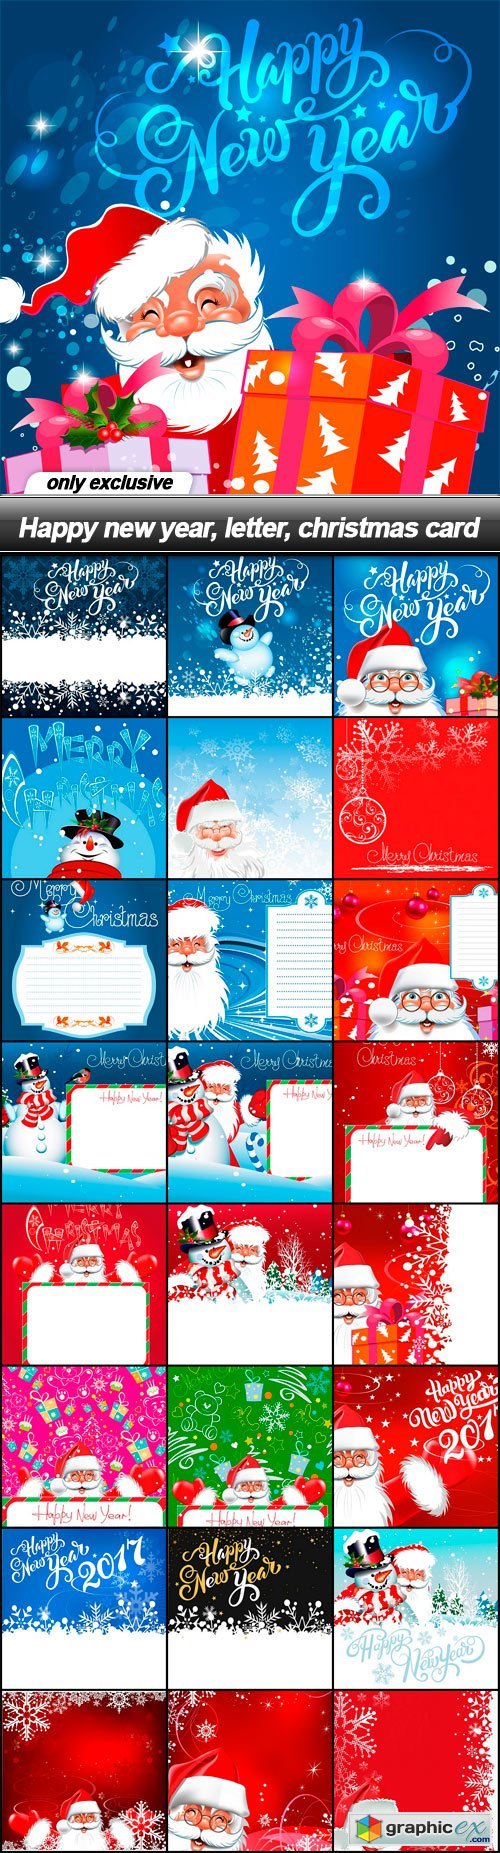 Happy new year, letter, christmas card - 25 EPS